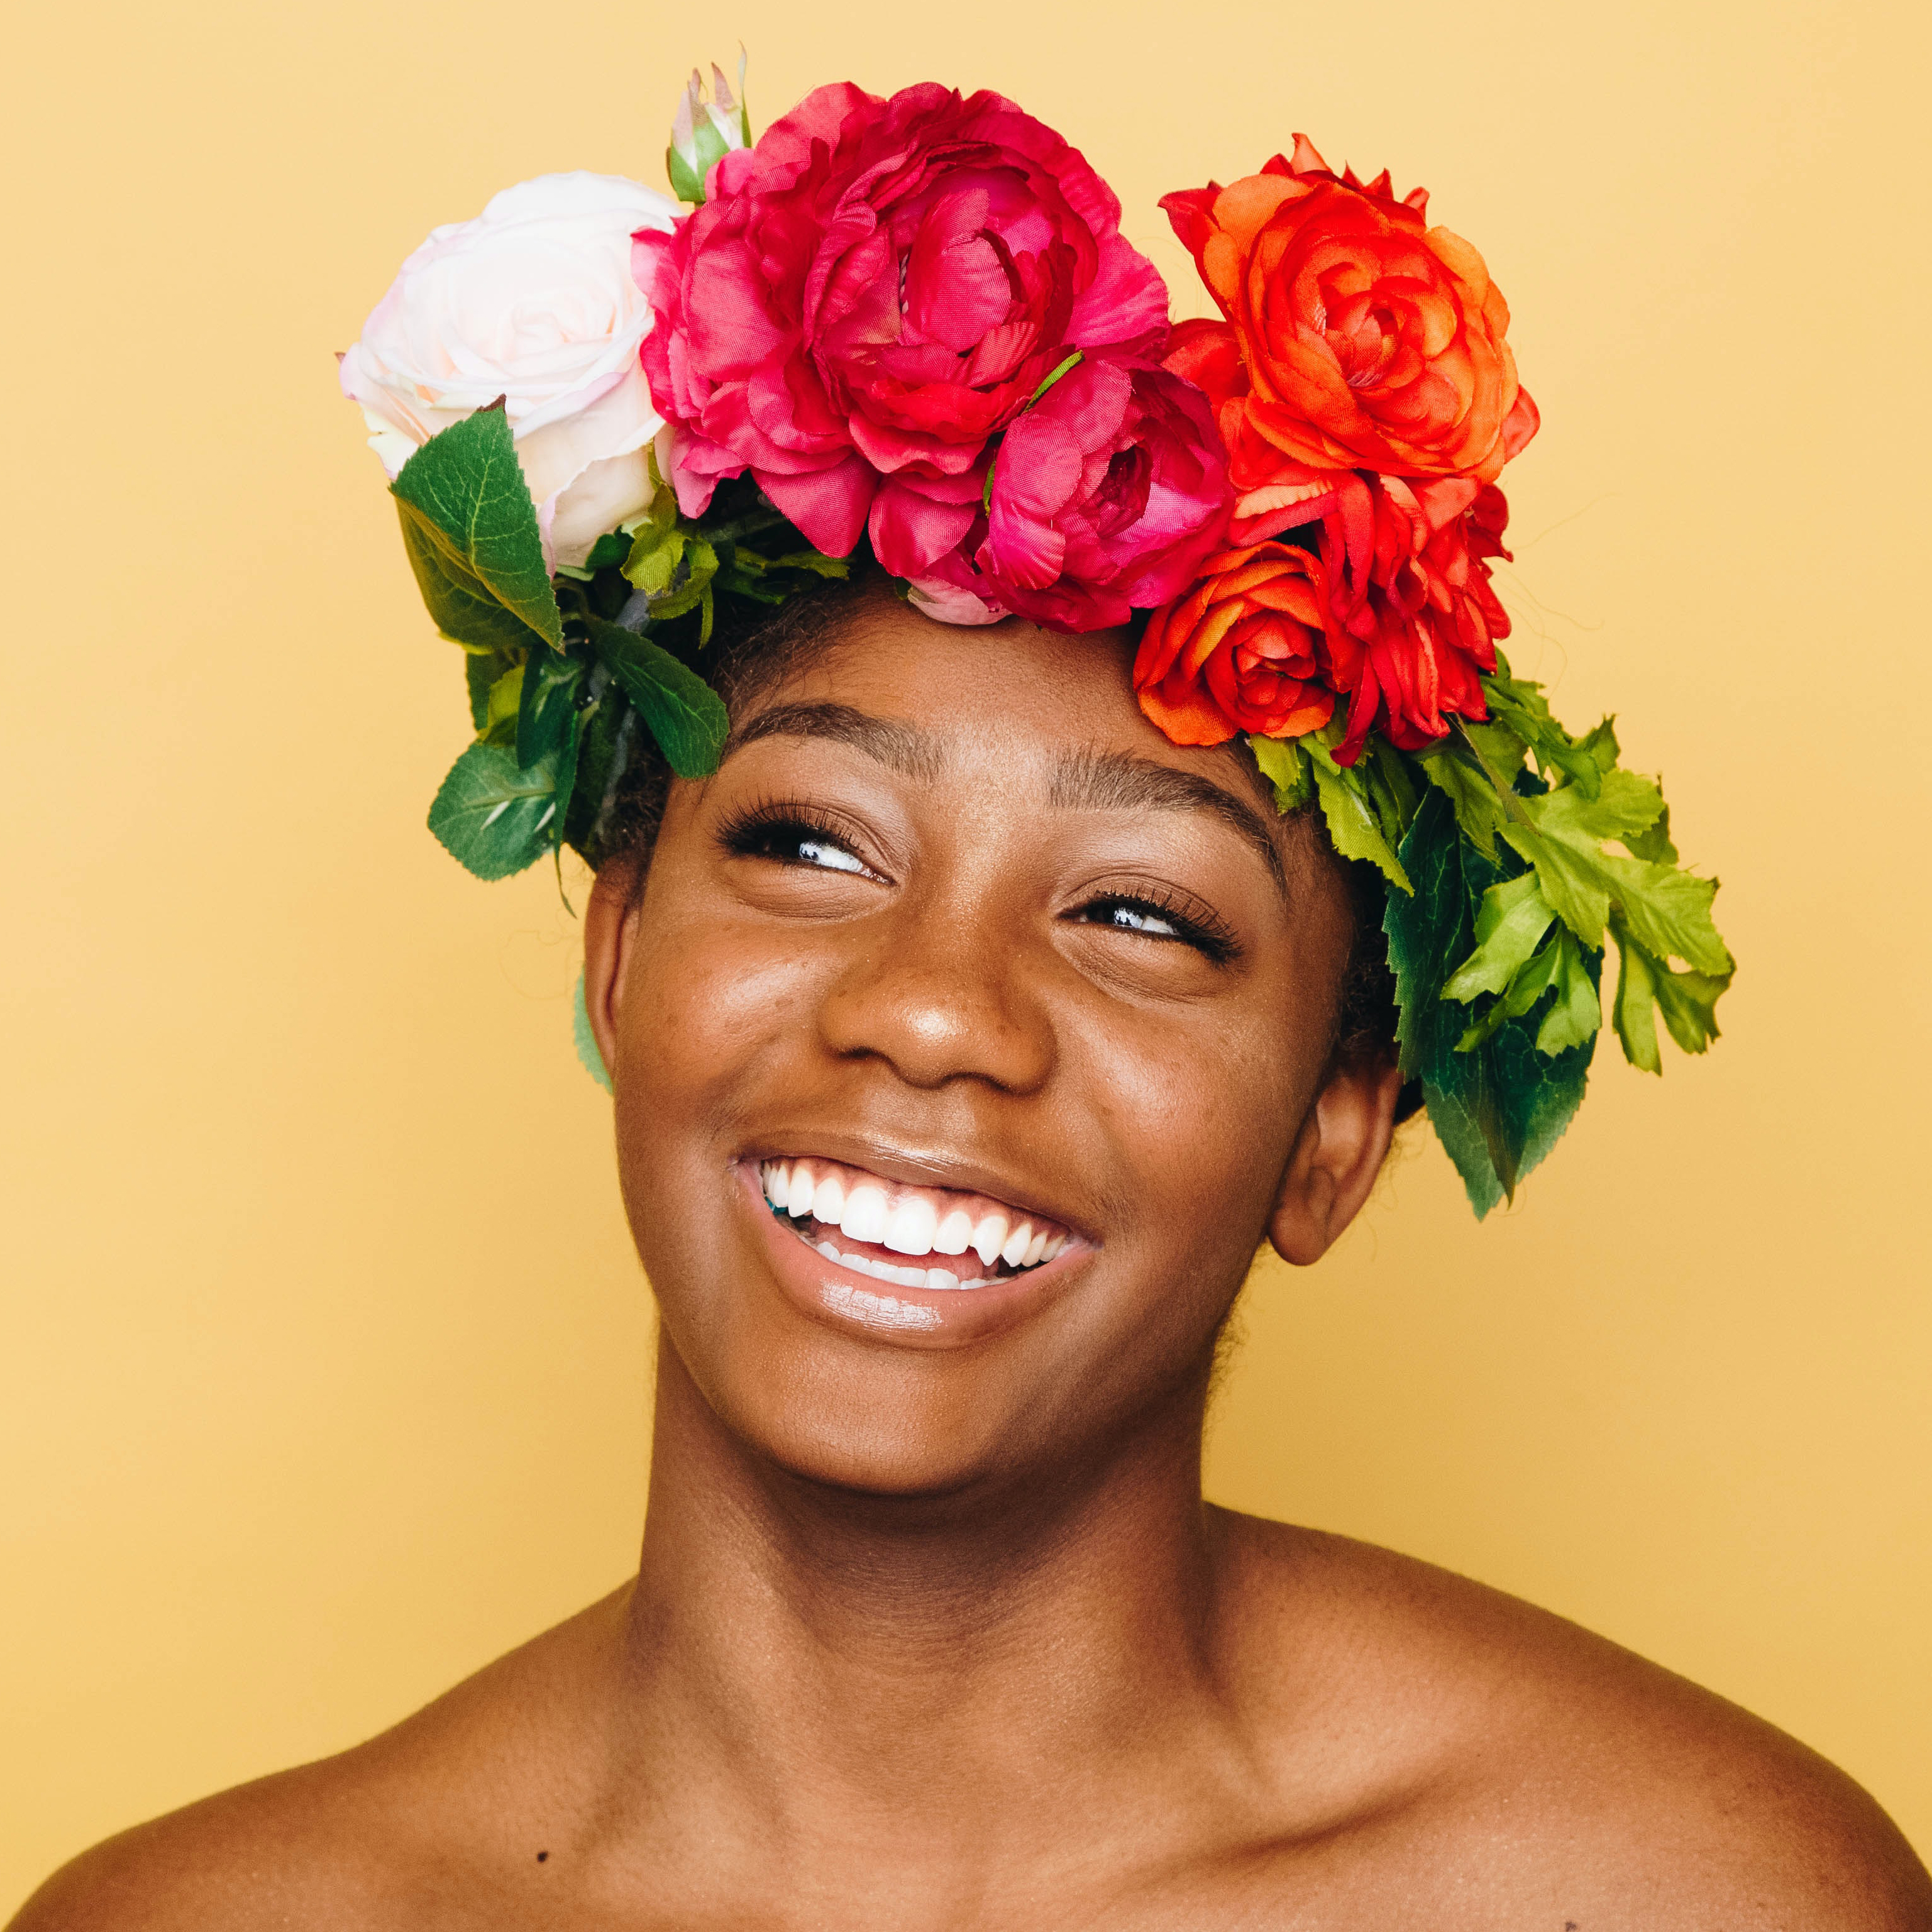 Tips-for-Working-With-Your-Florist-on-Bridal-Hair-Accessories-Unsplash